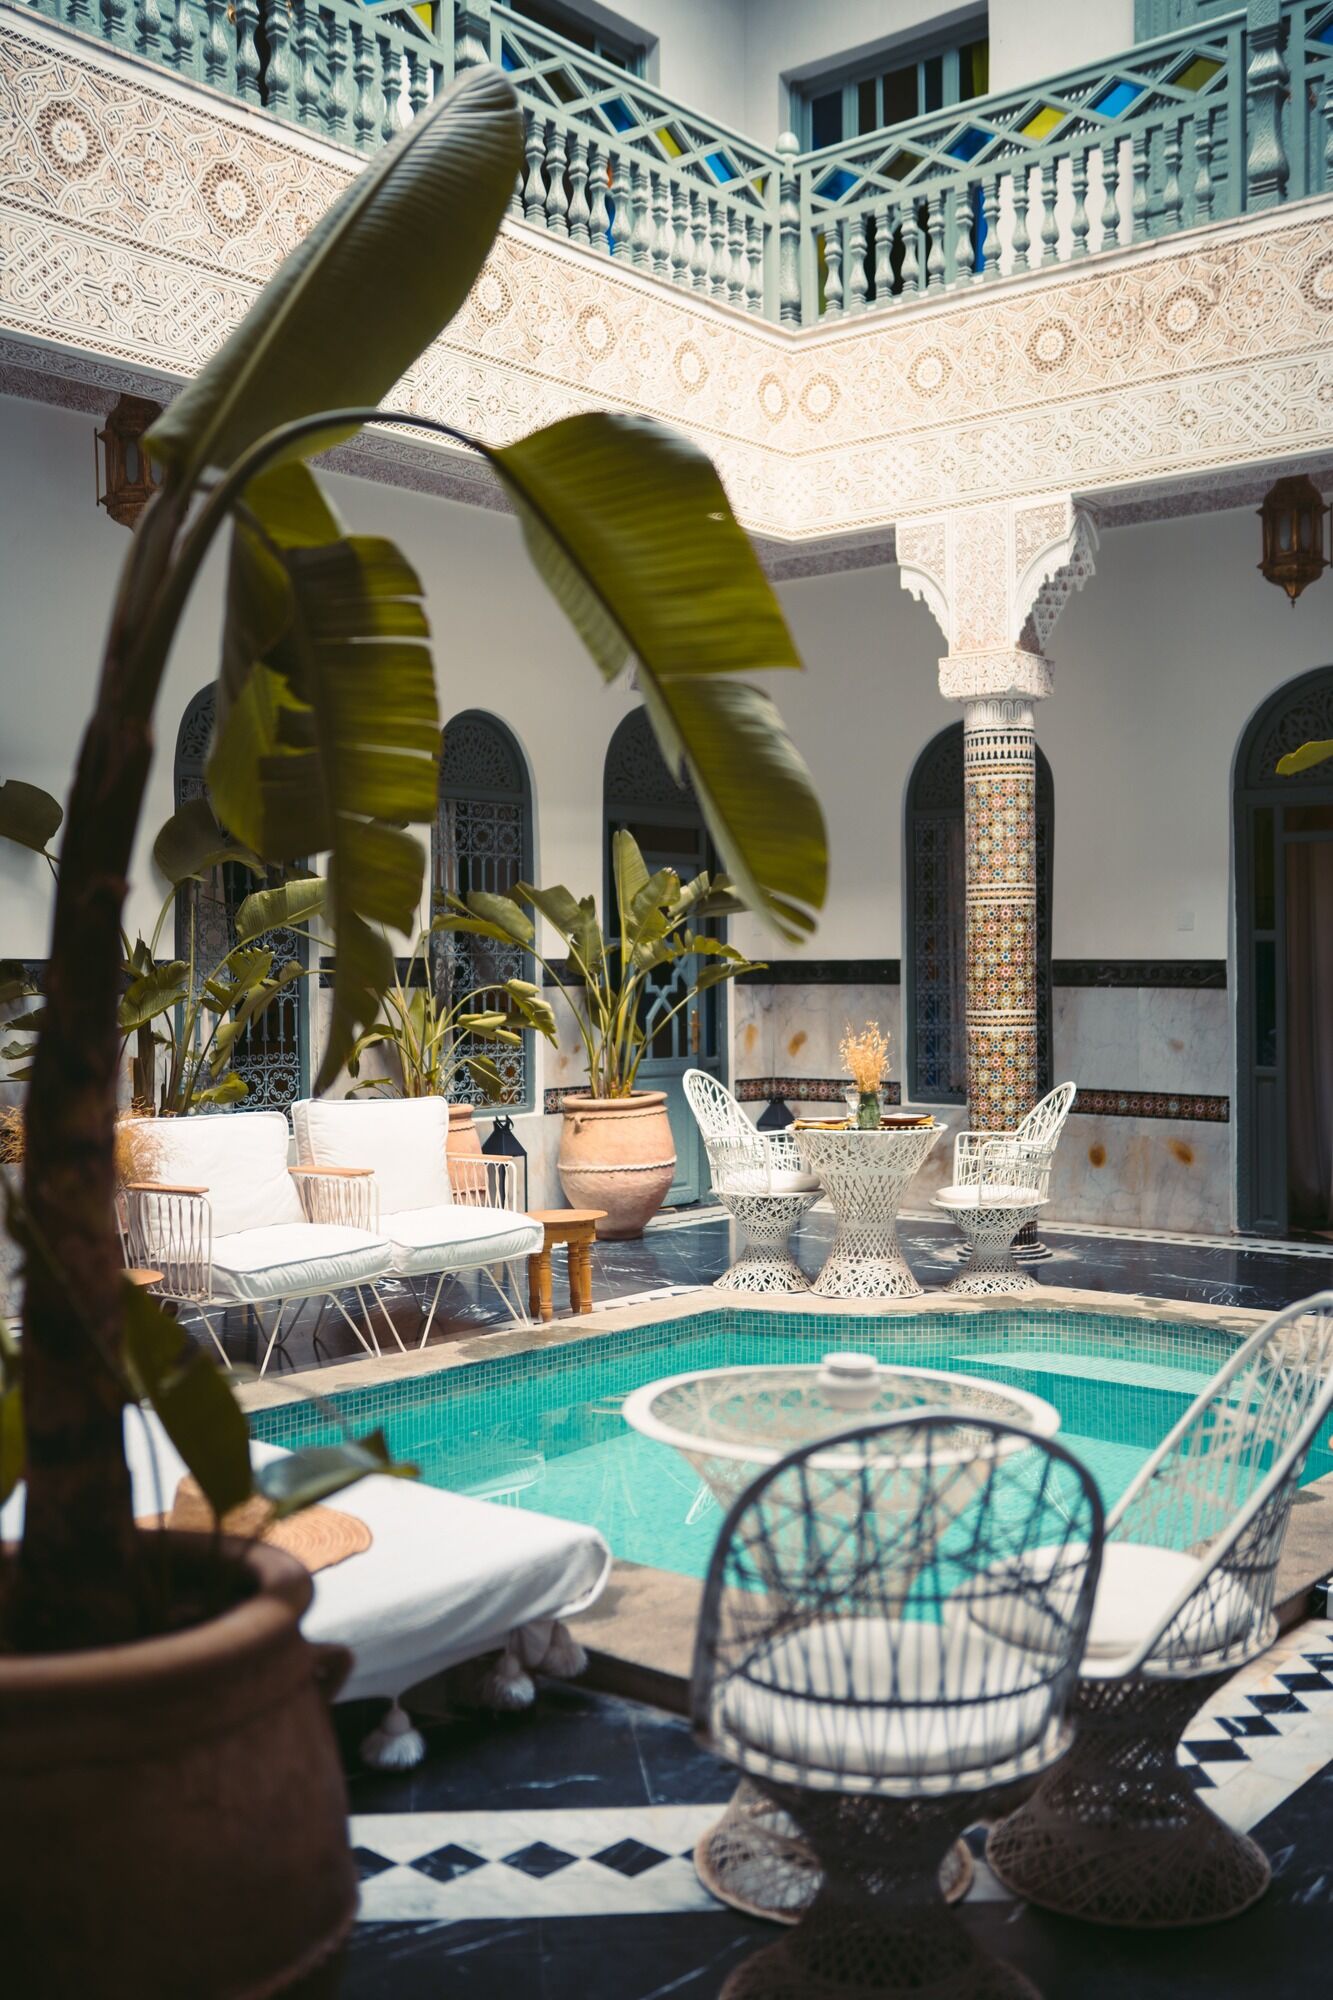 TOP 14 best hotels in Marrakech: from royal villas with pools and hammams to Berber tents in exotic locations